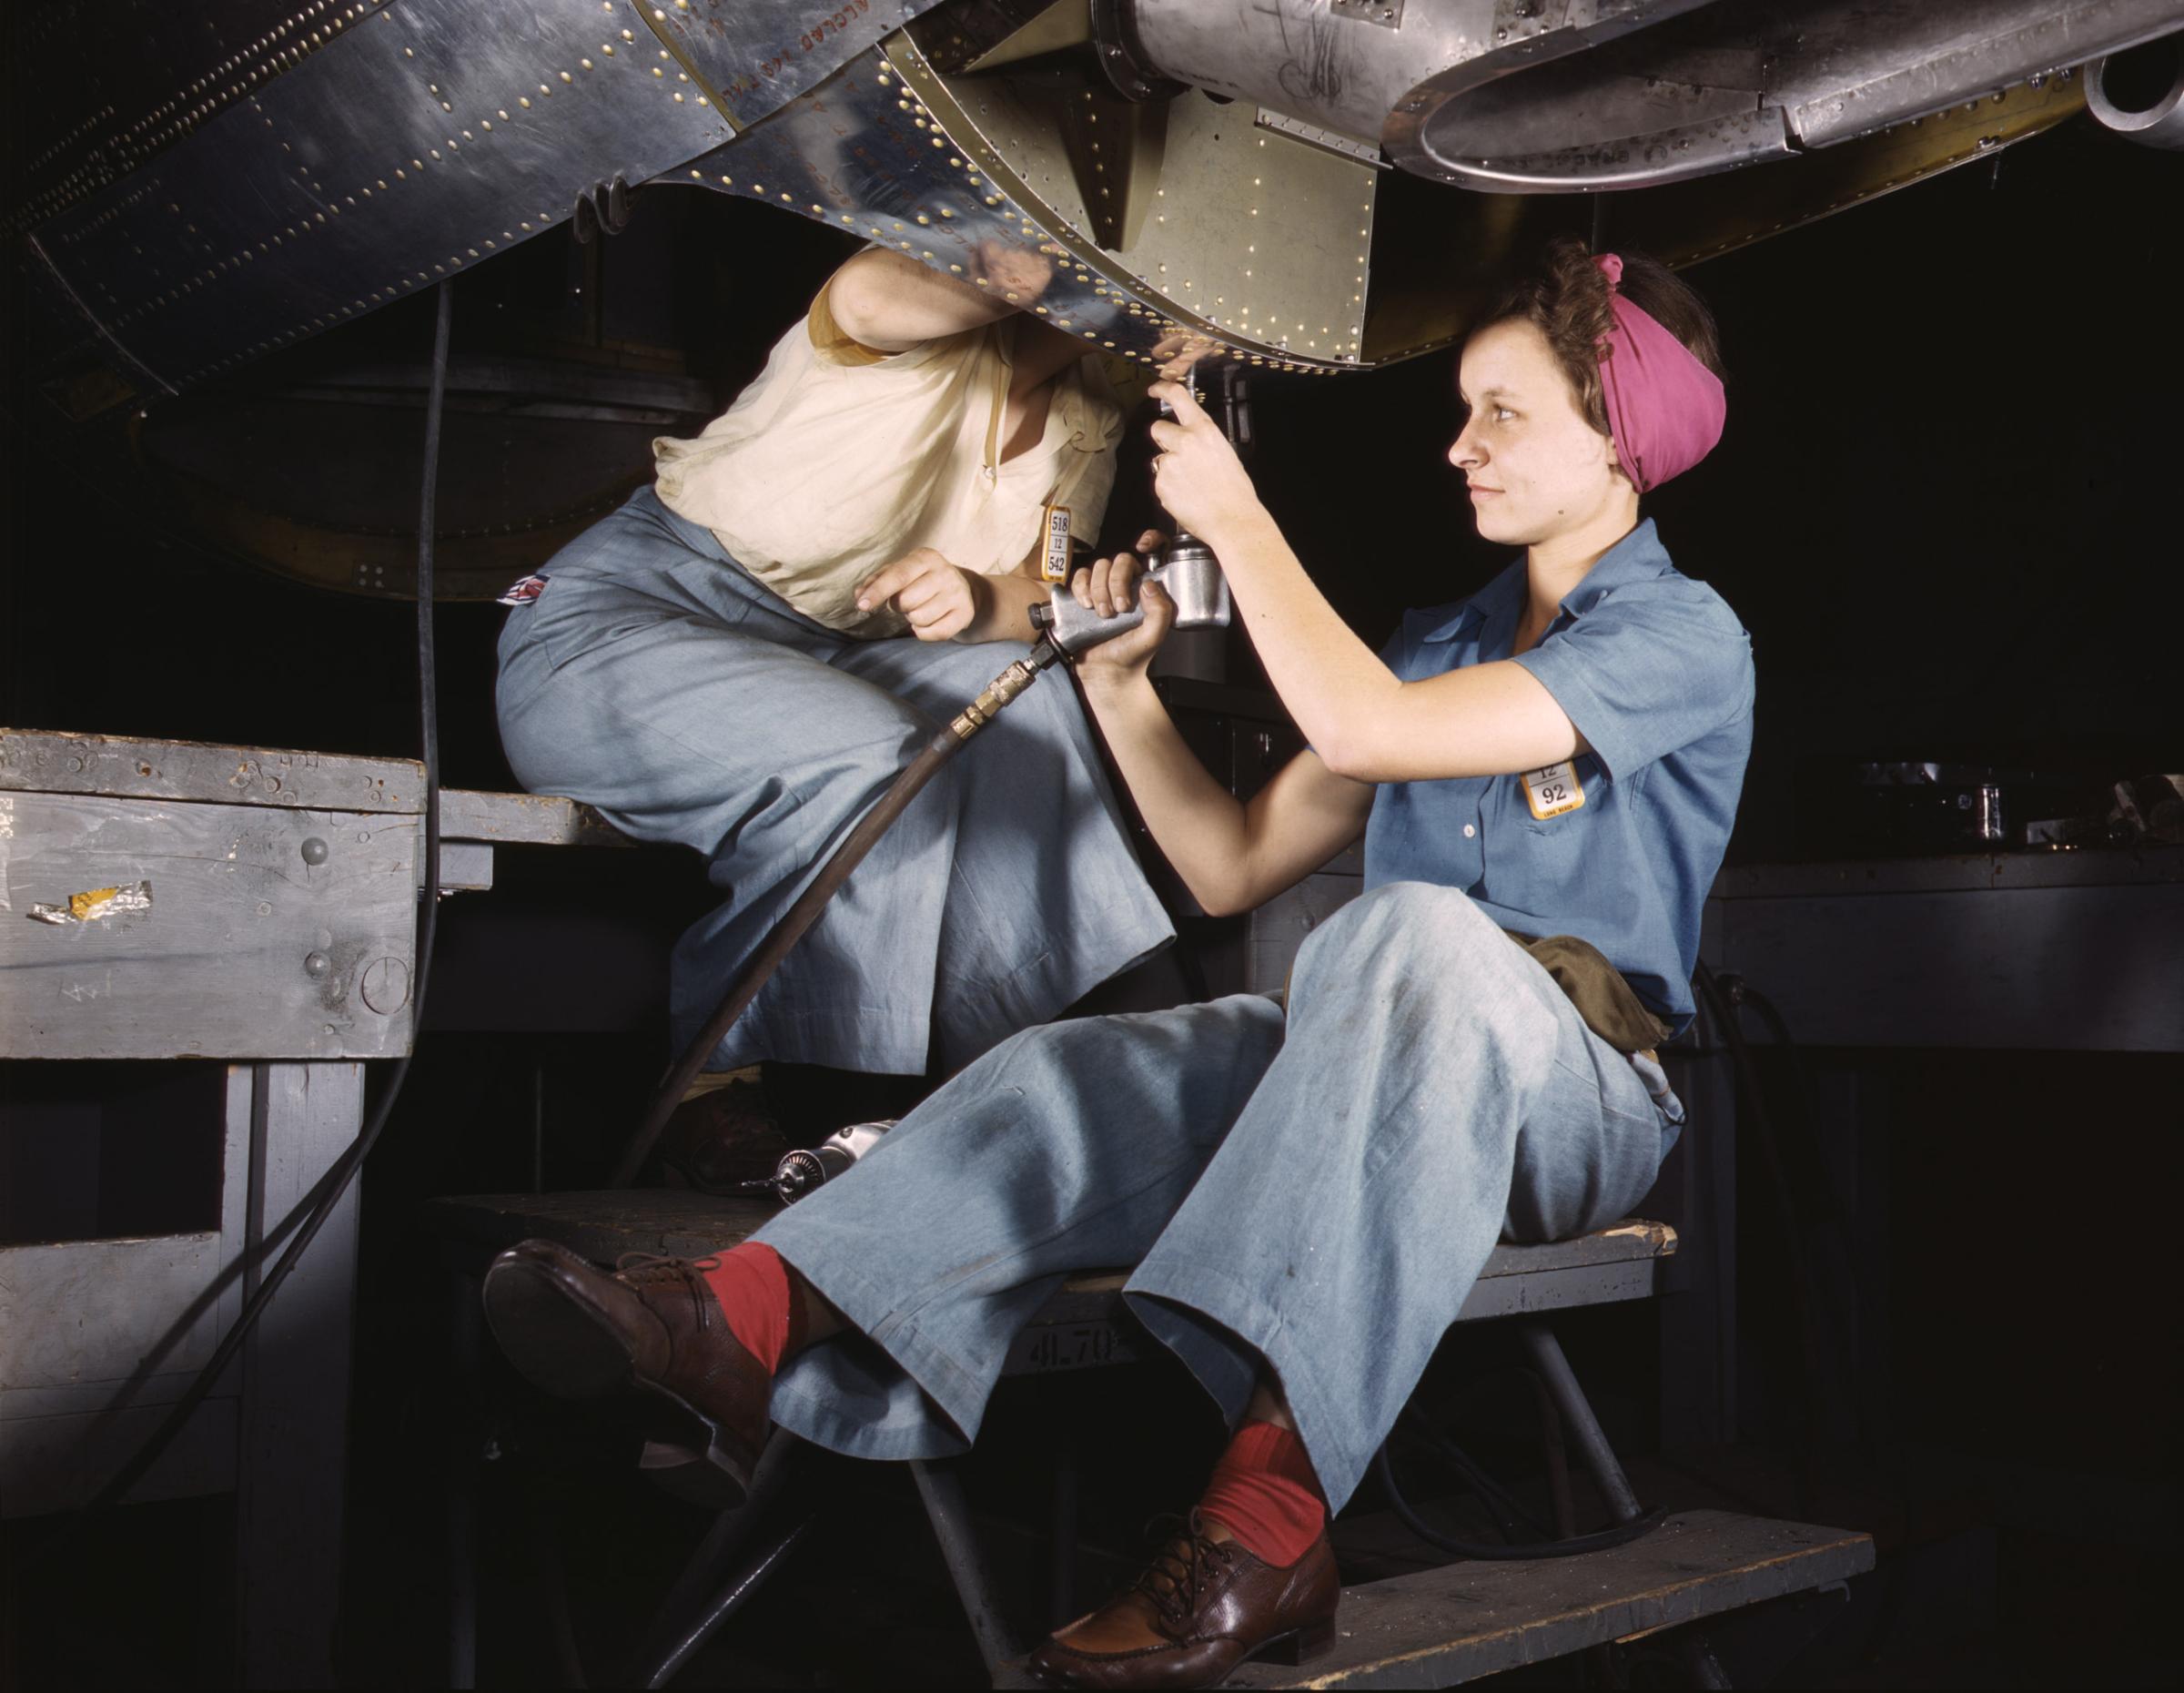 Women at work on C-47 Douglas cargo transport, Douglas Aircraft Company, Long Beach, California, October 1942. Photographed by Alfred T. Palmer for the Farm Security Administration.